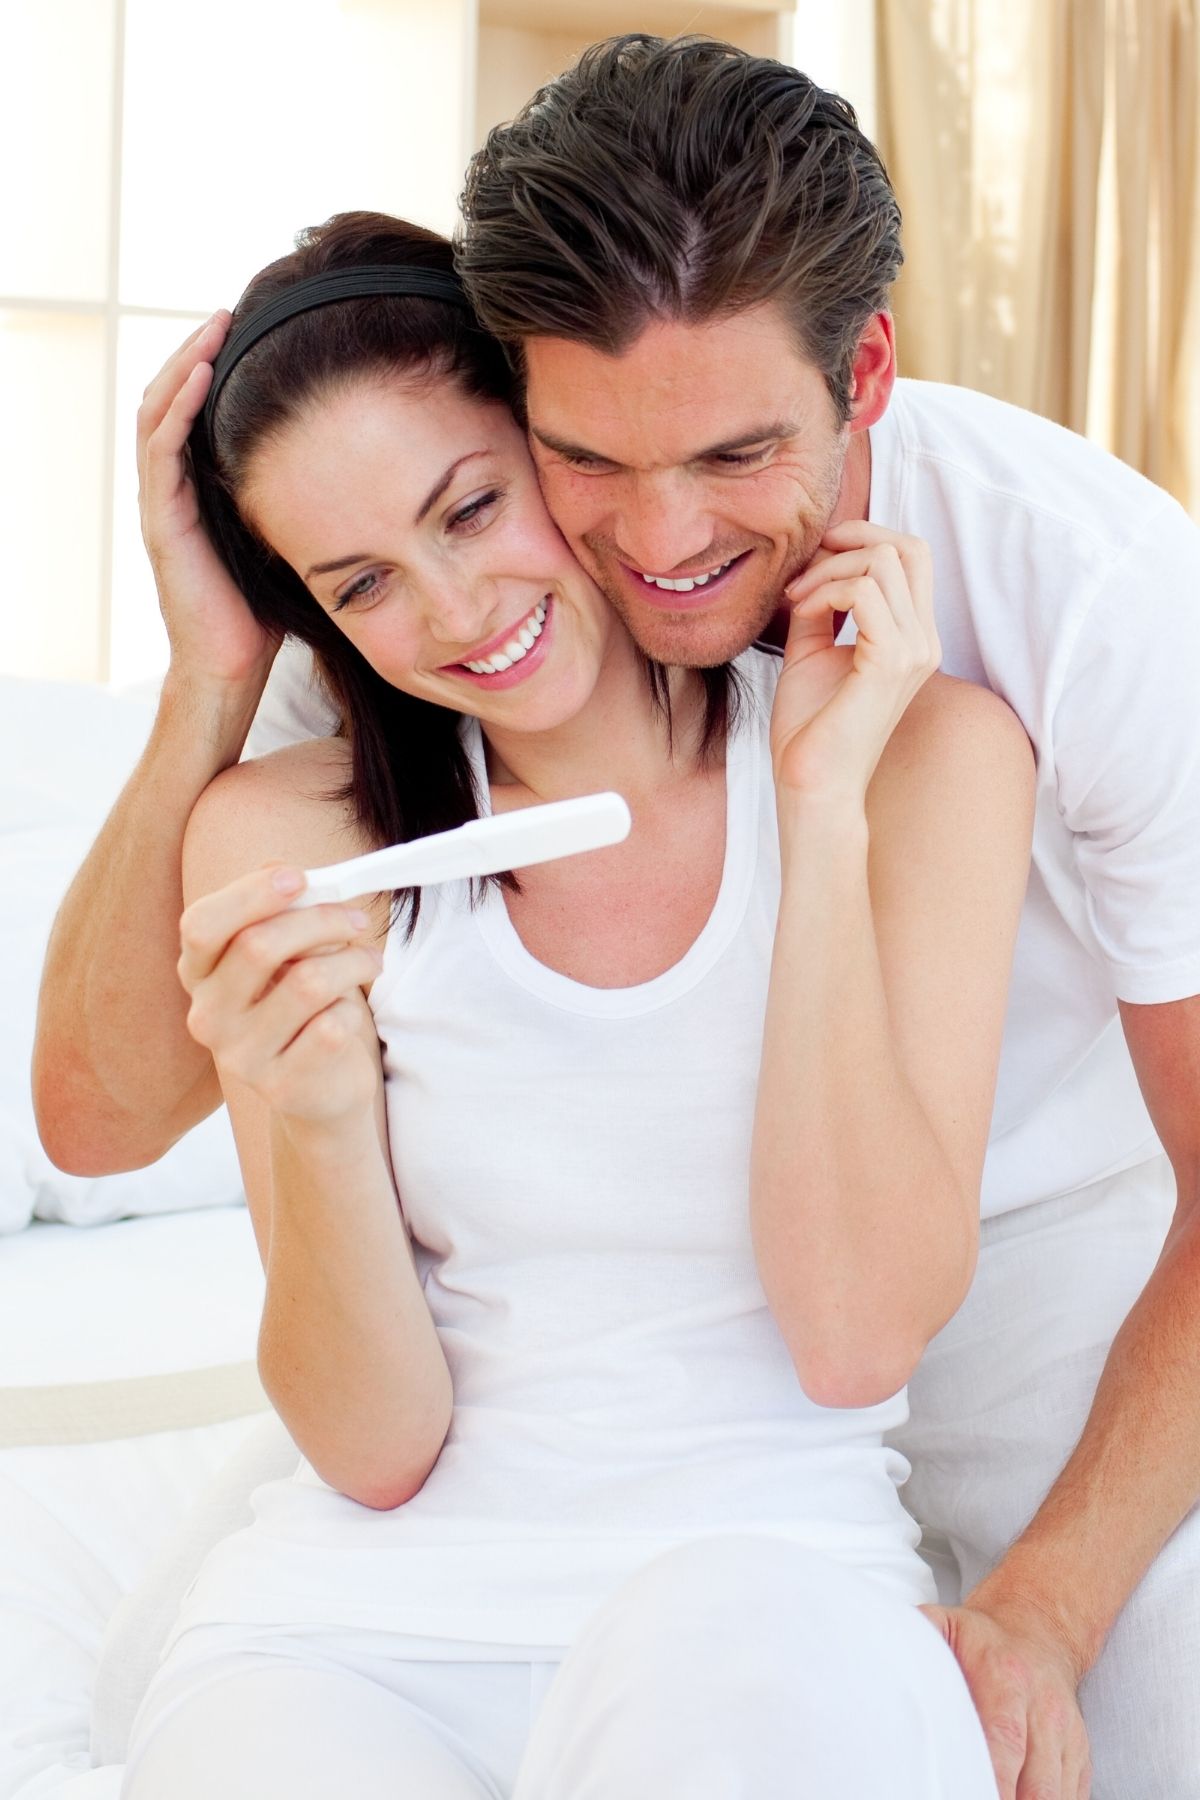 A couple wearing white shirts embraces as they look at the results of a pregnancy test.